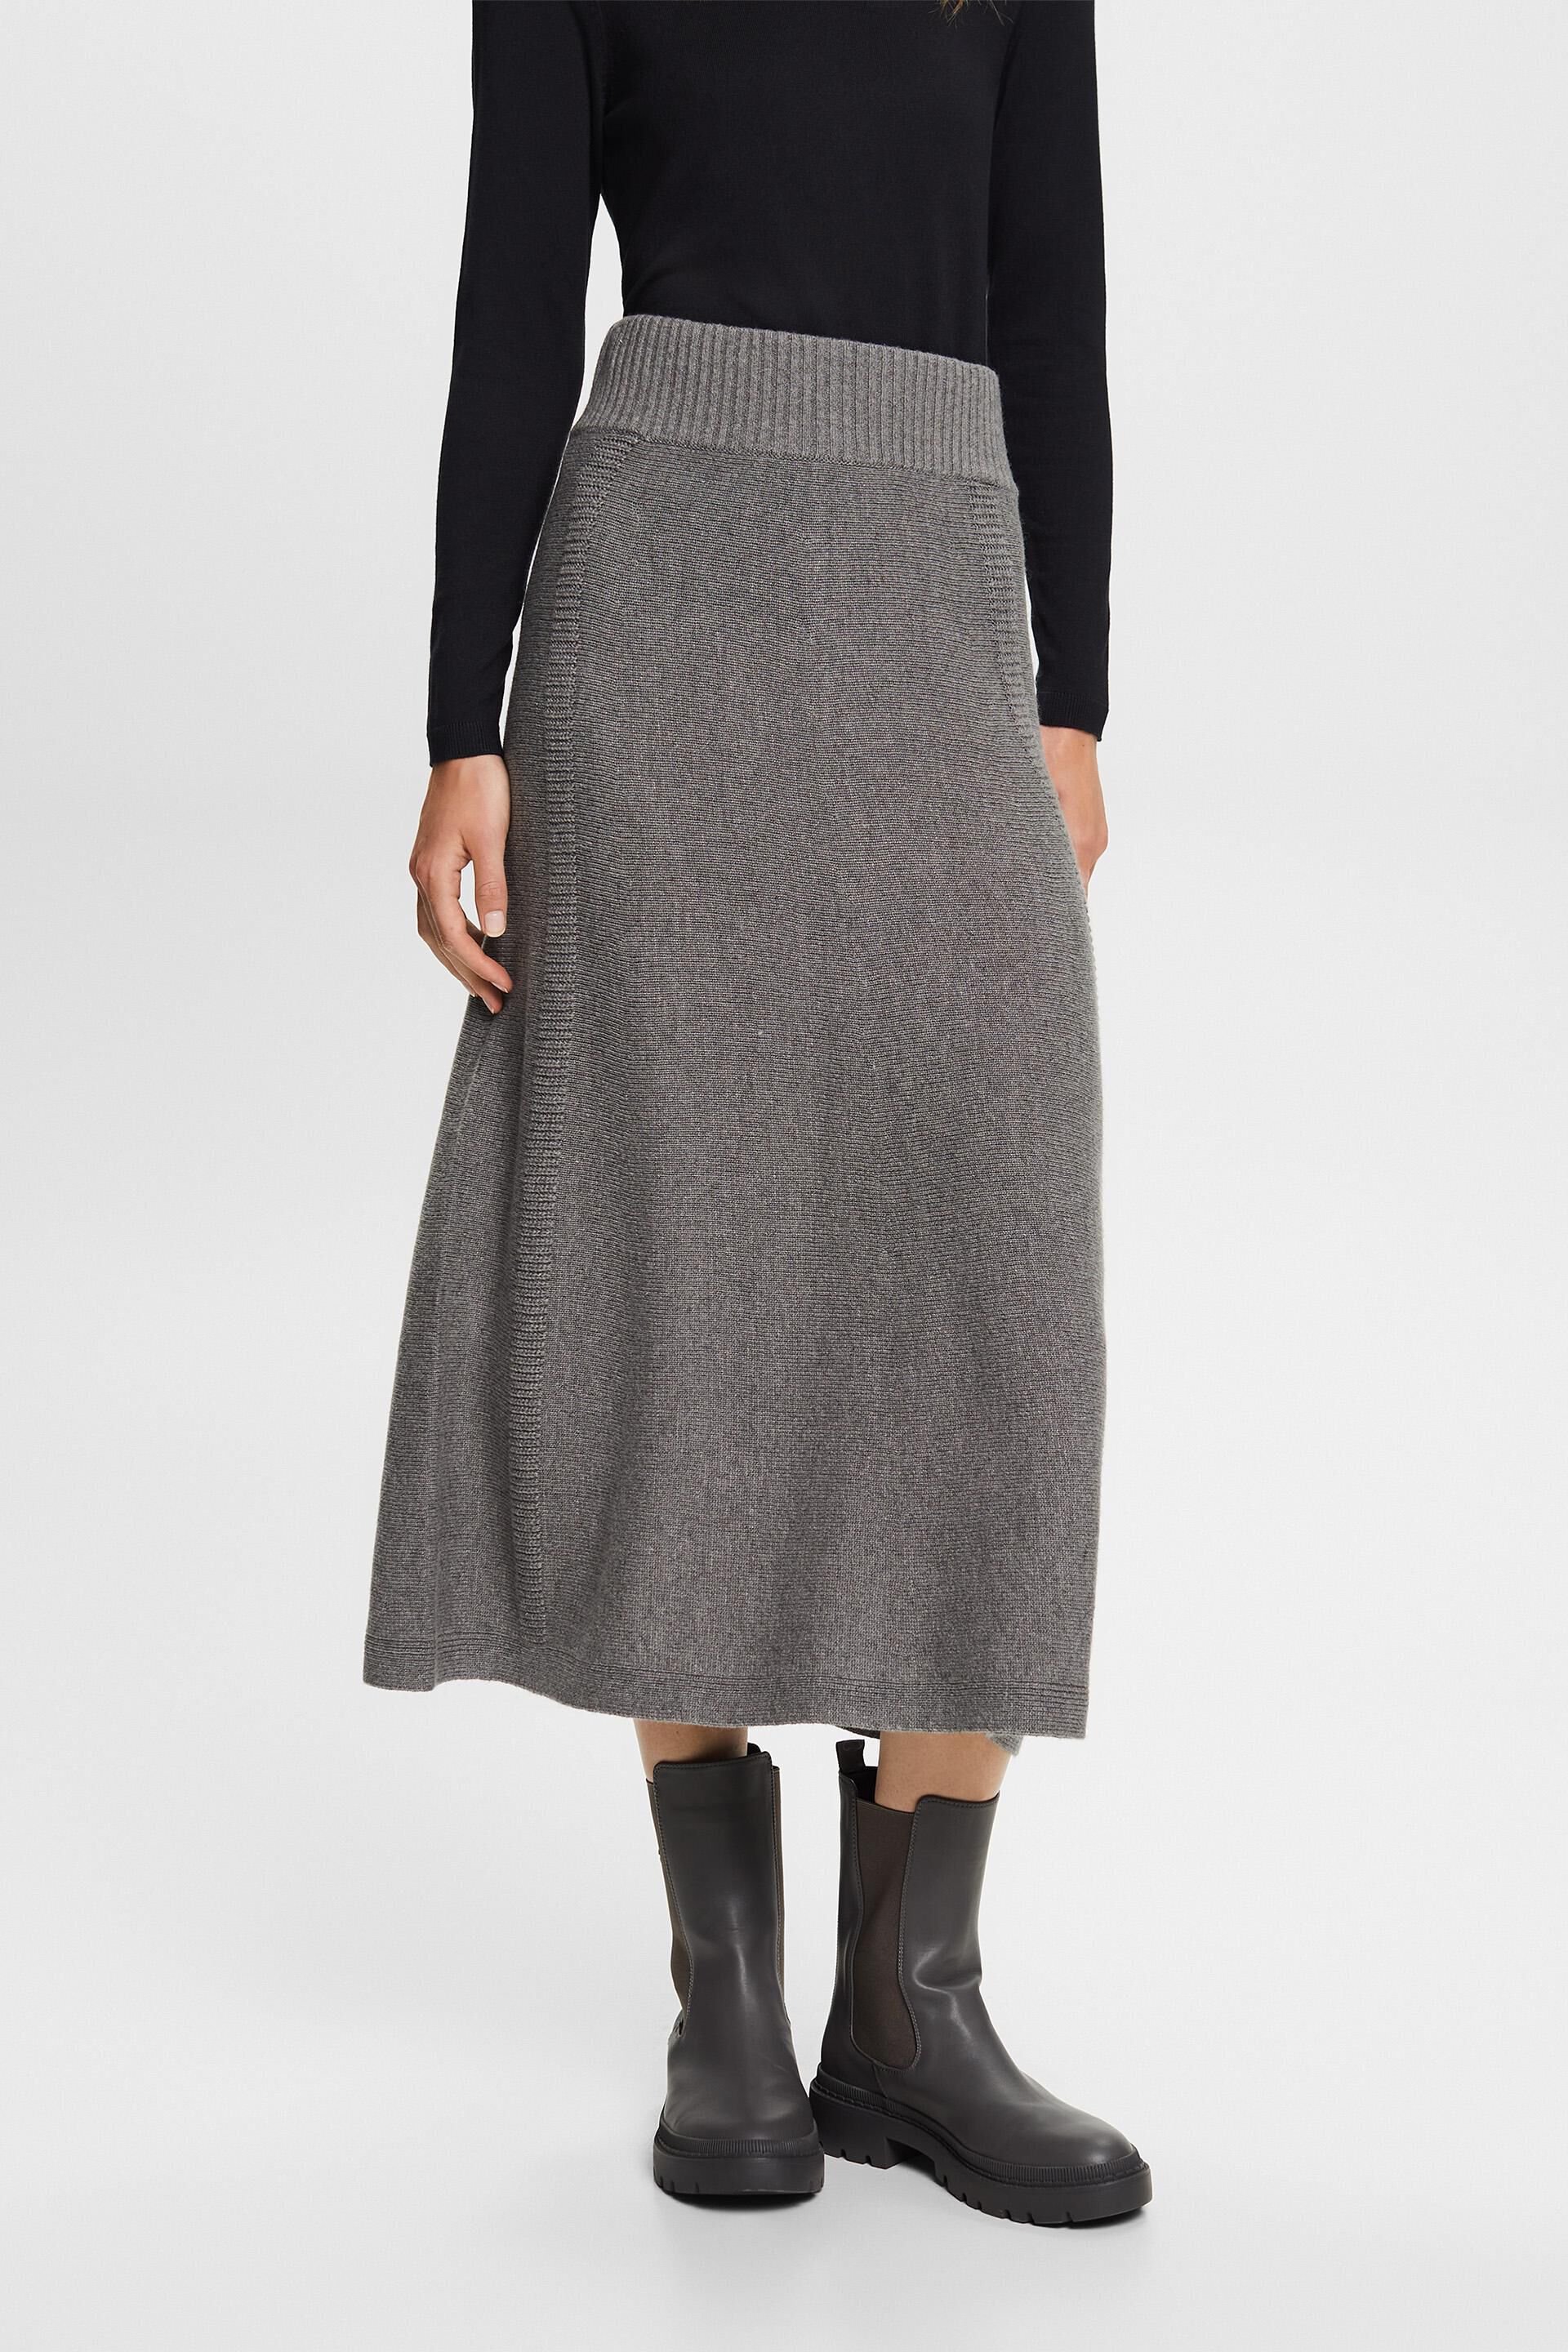 Esprit flat knitted Skirts